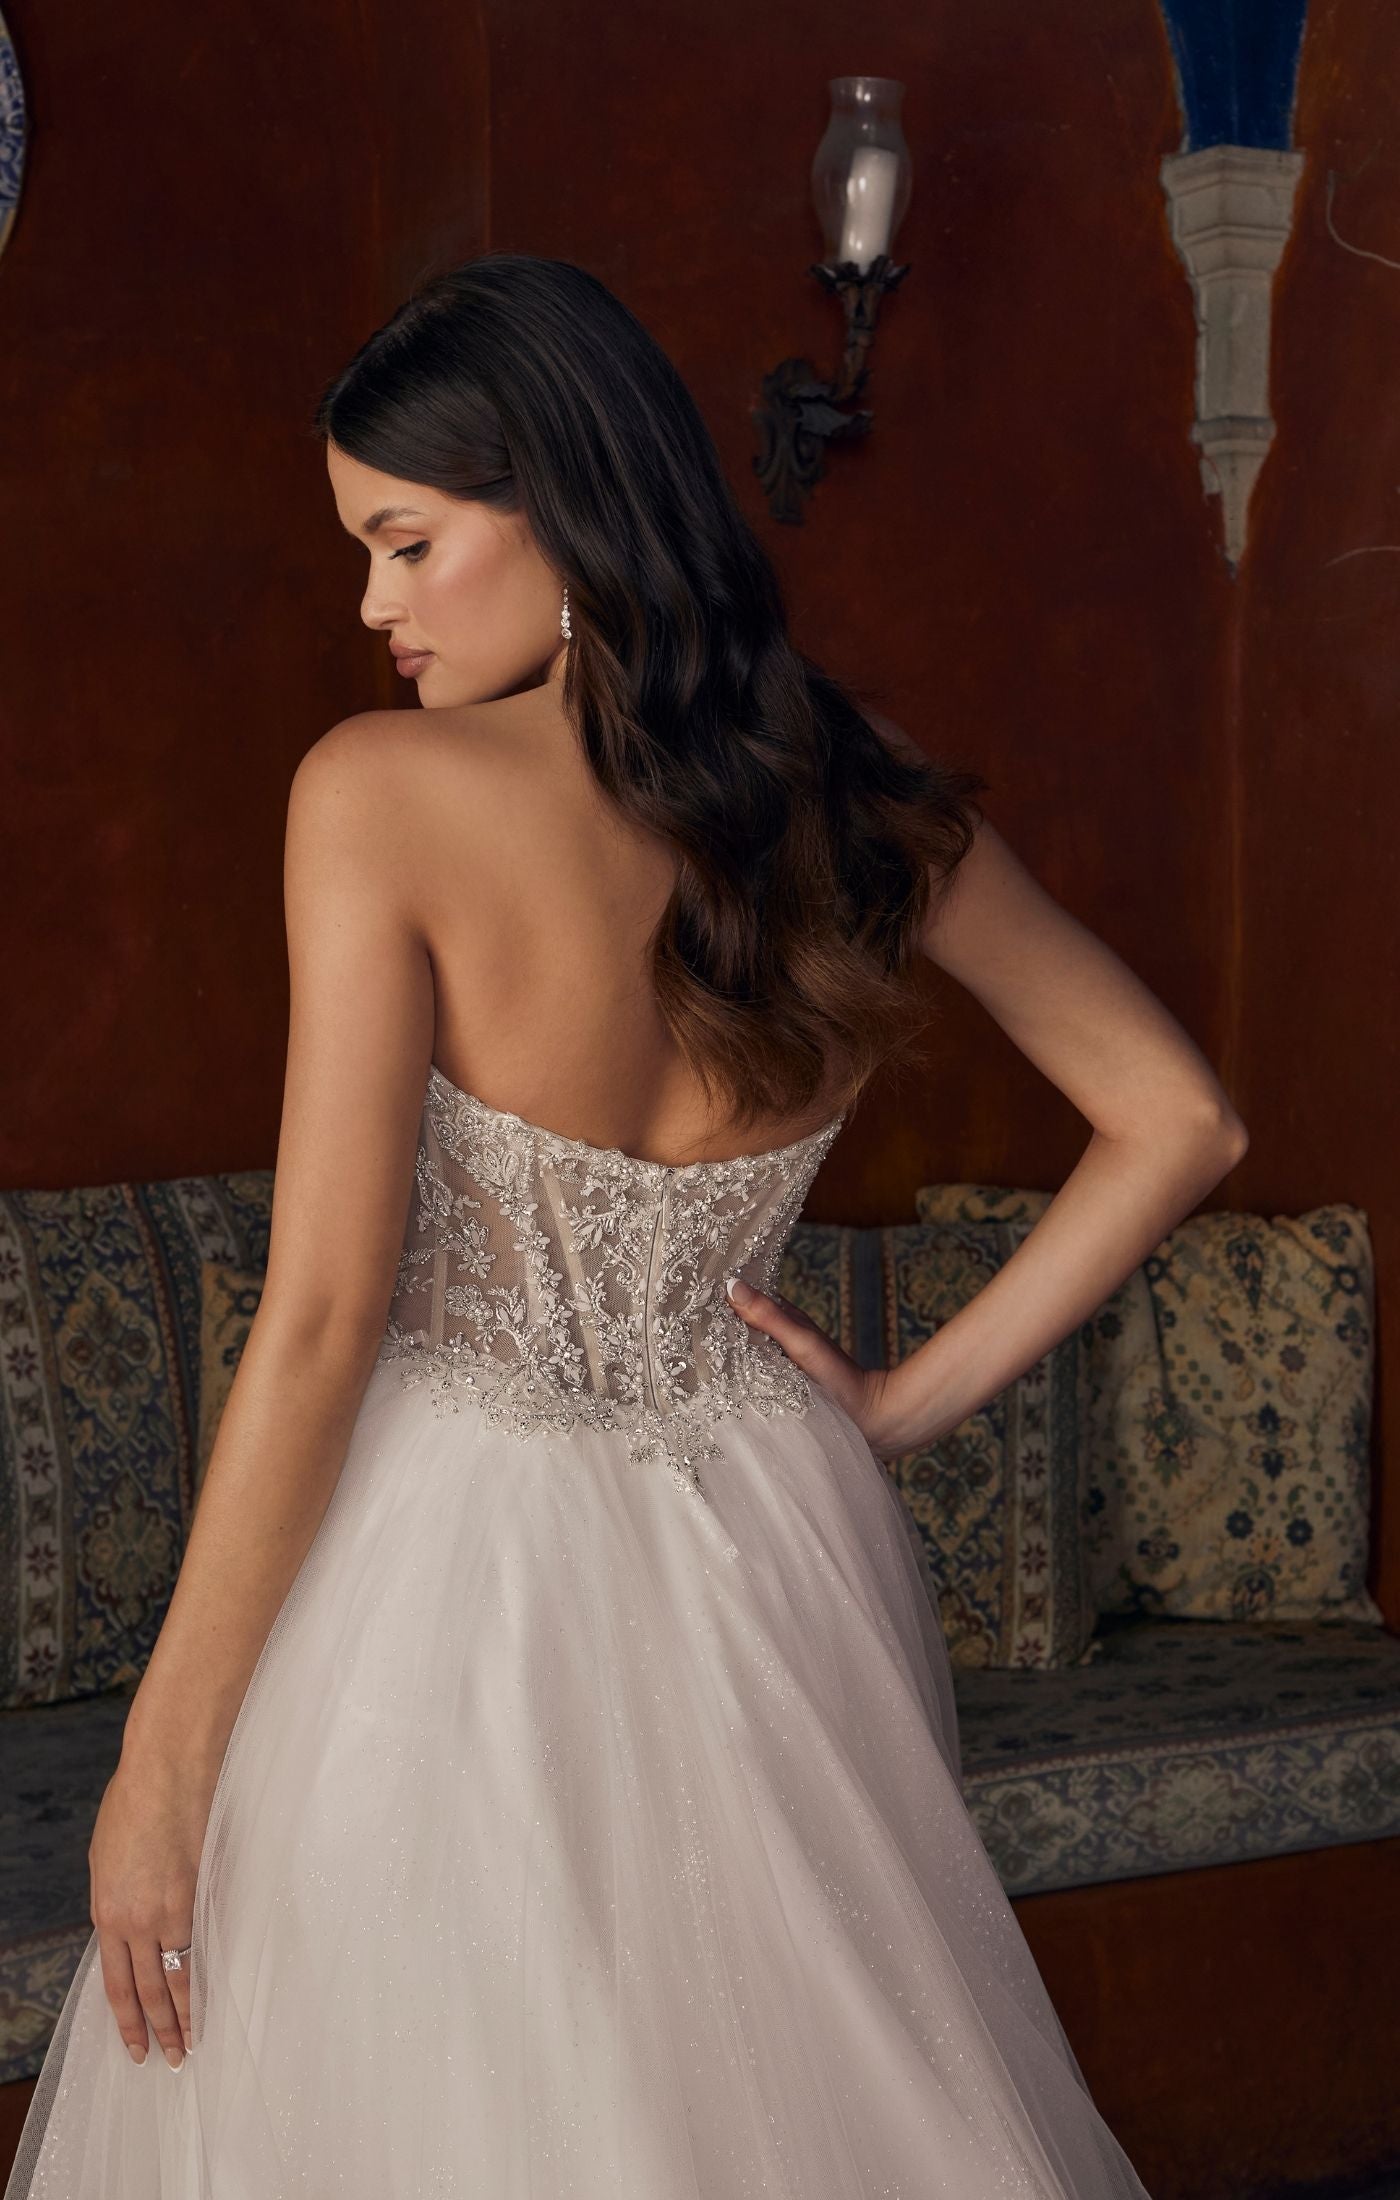 Casablanca Bridal 2547 Meline A-Line Ballgown Sheer Corset Off The Shoulder Plunging Neckline Train Wedding Gown. 2547 is a sparkling sensation, for the bride who wants to glimmer from every angle. This stunning ballgown wedding dress features an intricately beaded illusion bodice, accented by a plunging neckline and detachable off the shoulder, soft tulle straps. From tulle off-shoulder straps, to completely strapless, this versatile gown offers options for a reception change!